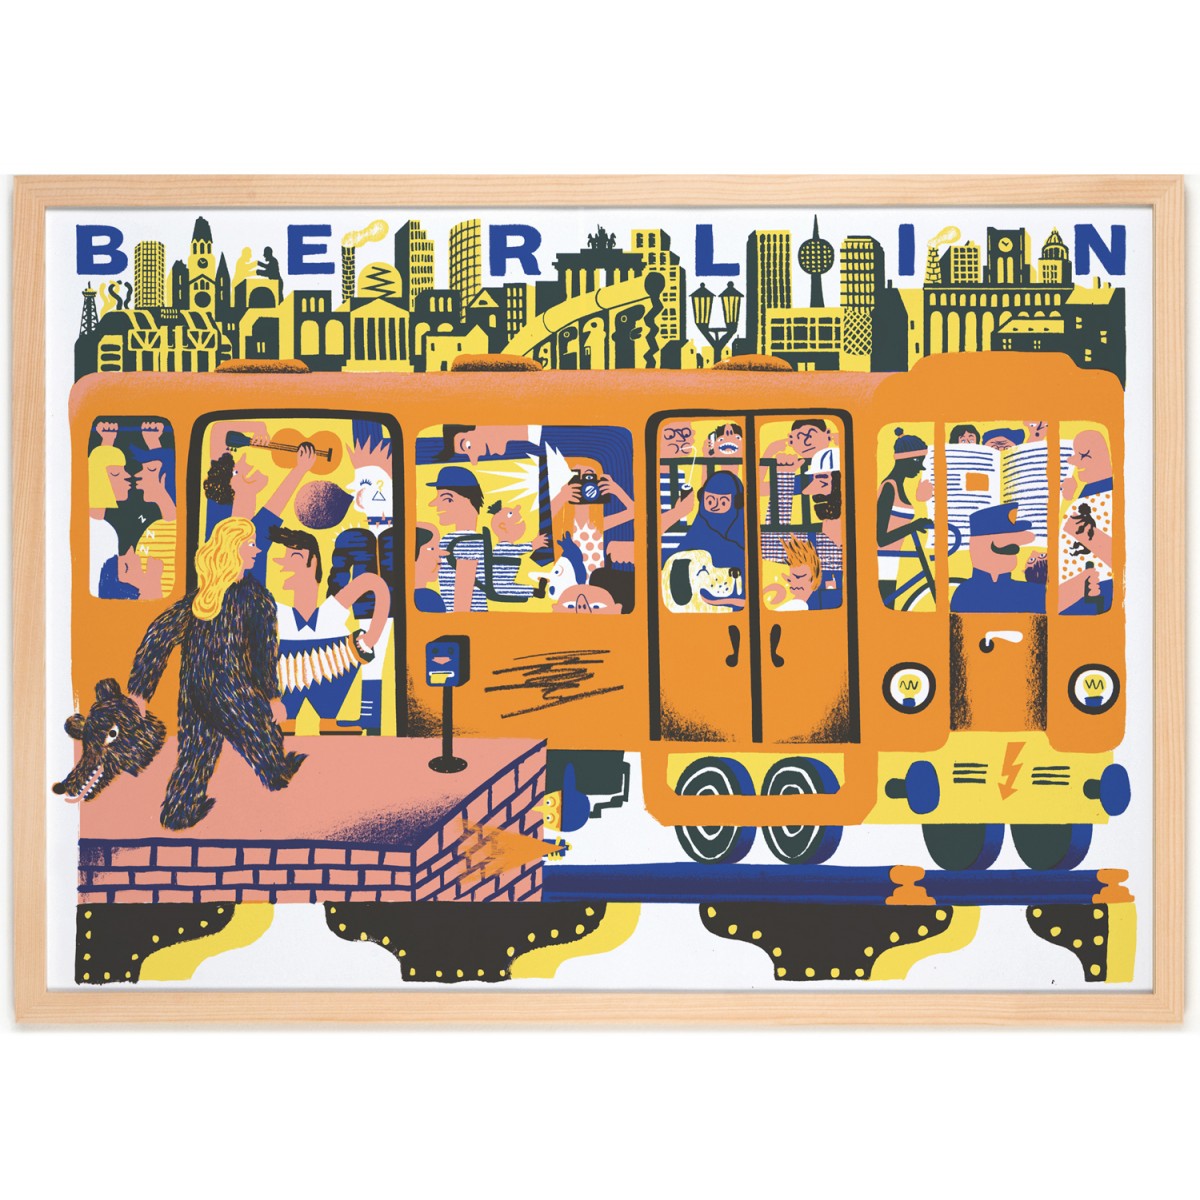 Human Empire Berlin Tube Poster (50x70cm) by Golden Cosmos